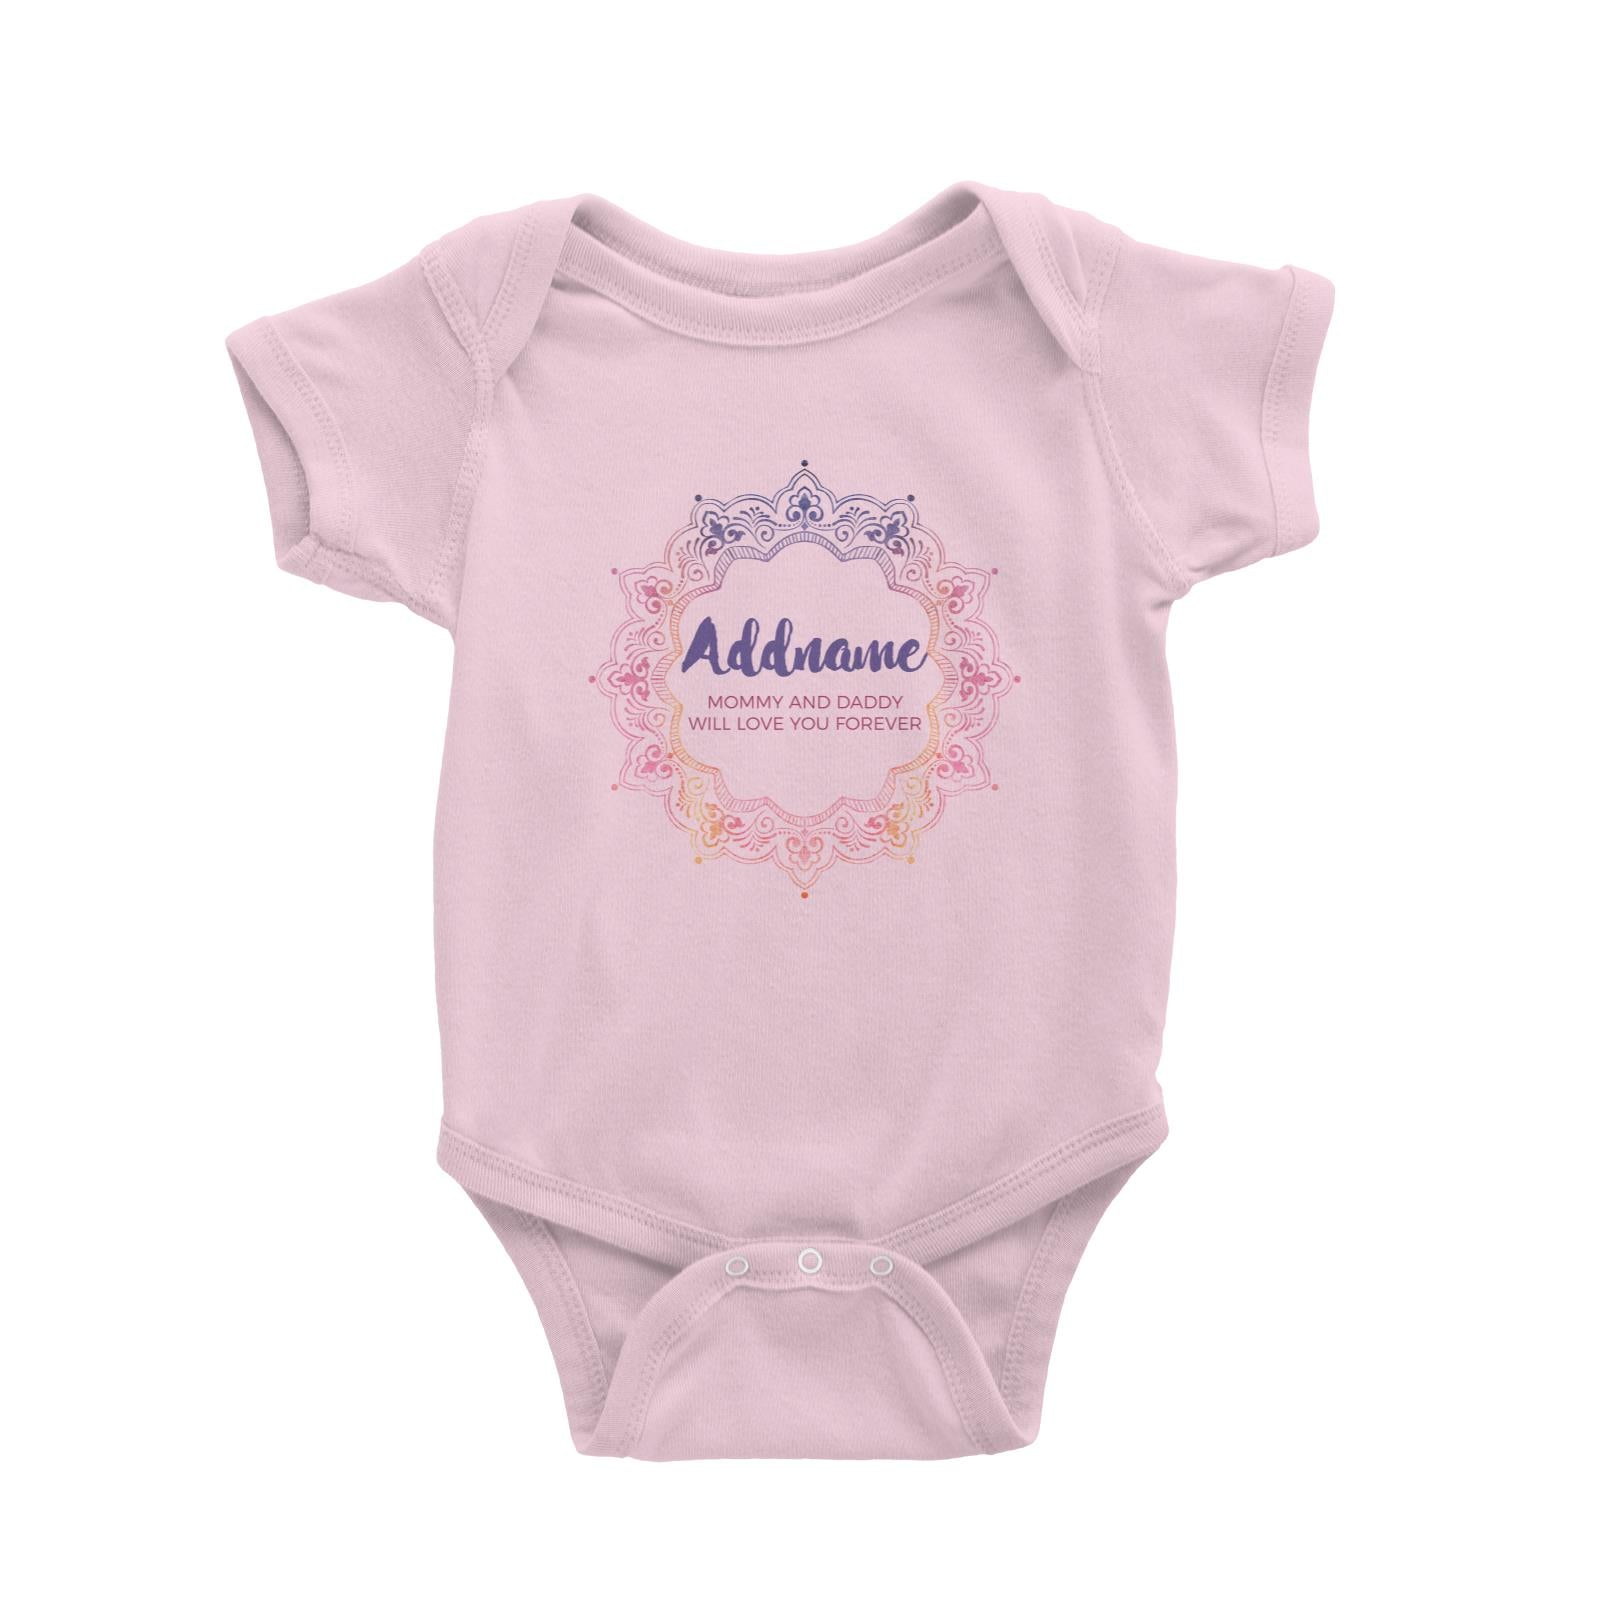 Pink and Purple Ethnic Mandala Motif Personalizable with Name and Text Baby Romper